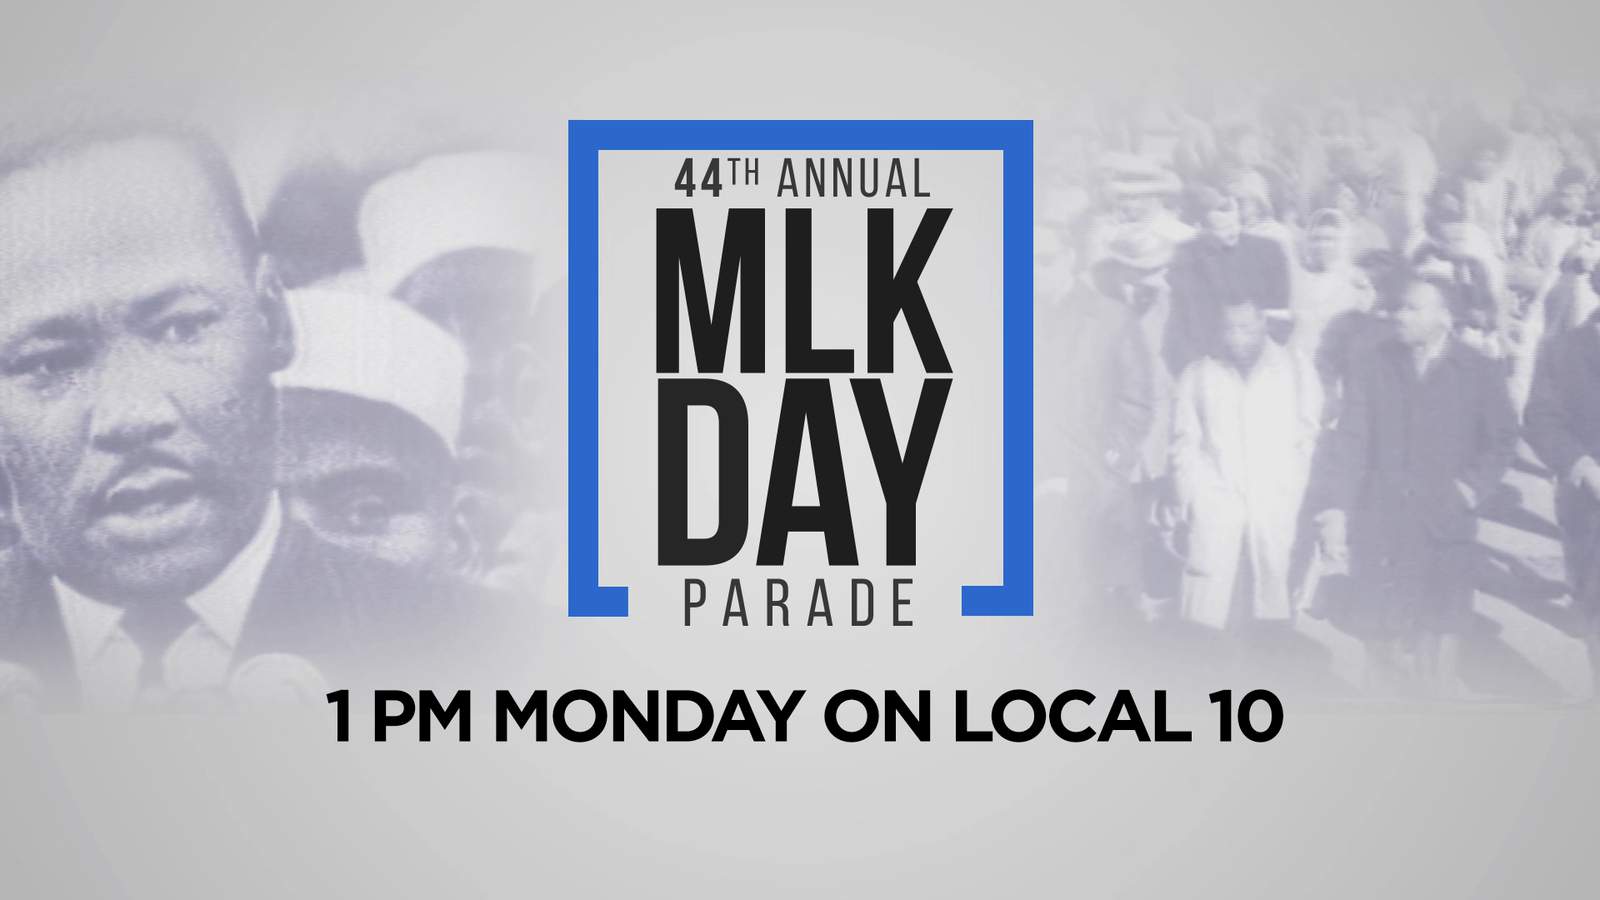 WATCH: 2021 Martin Luther King Jr. parade replay